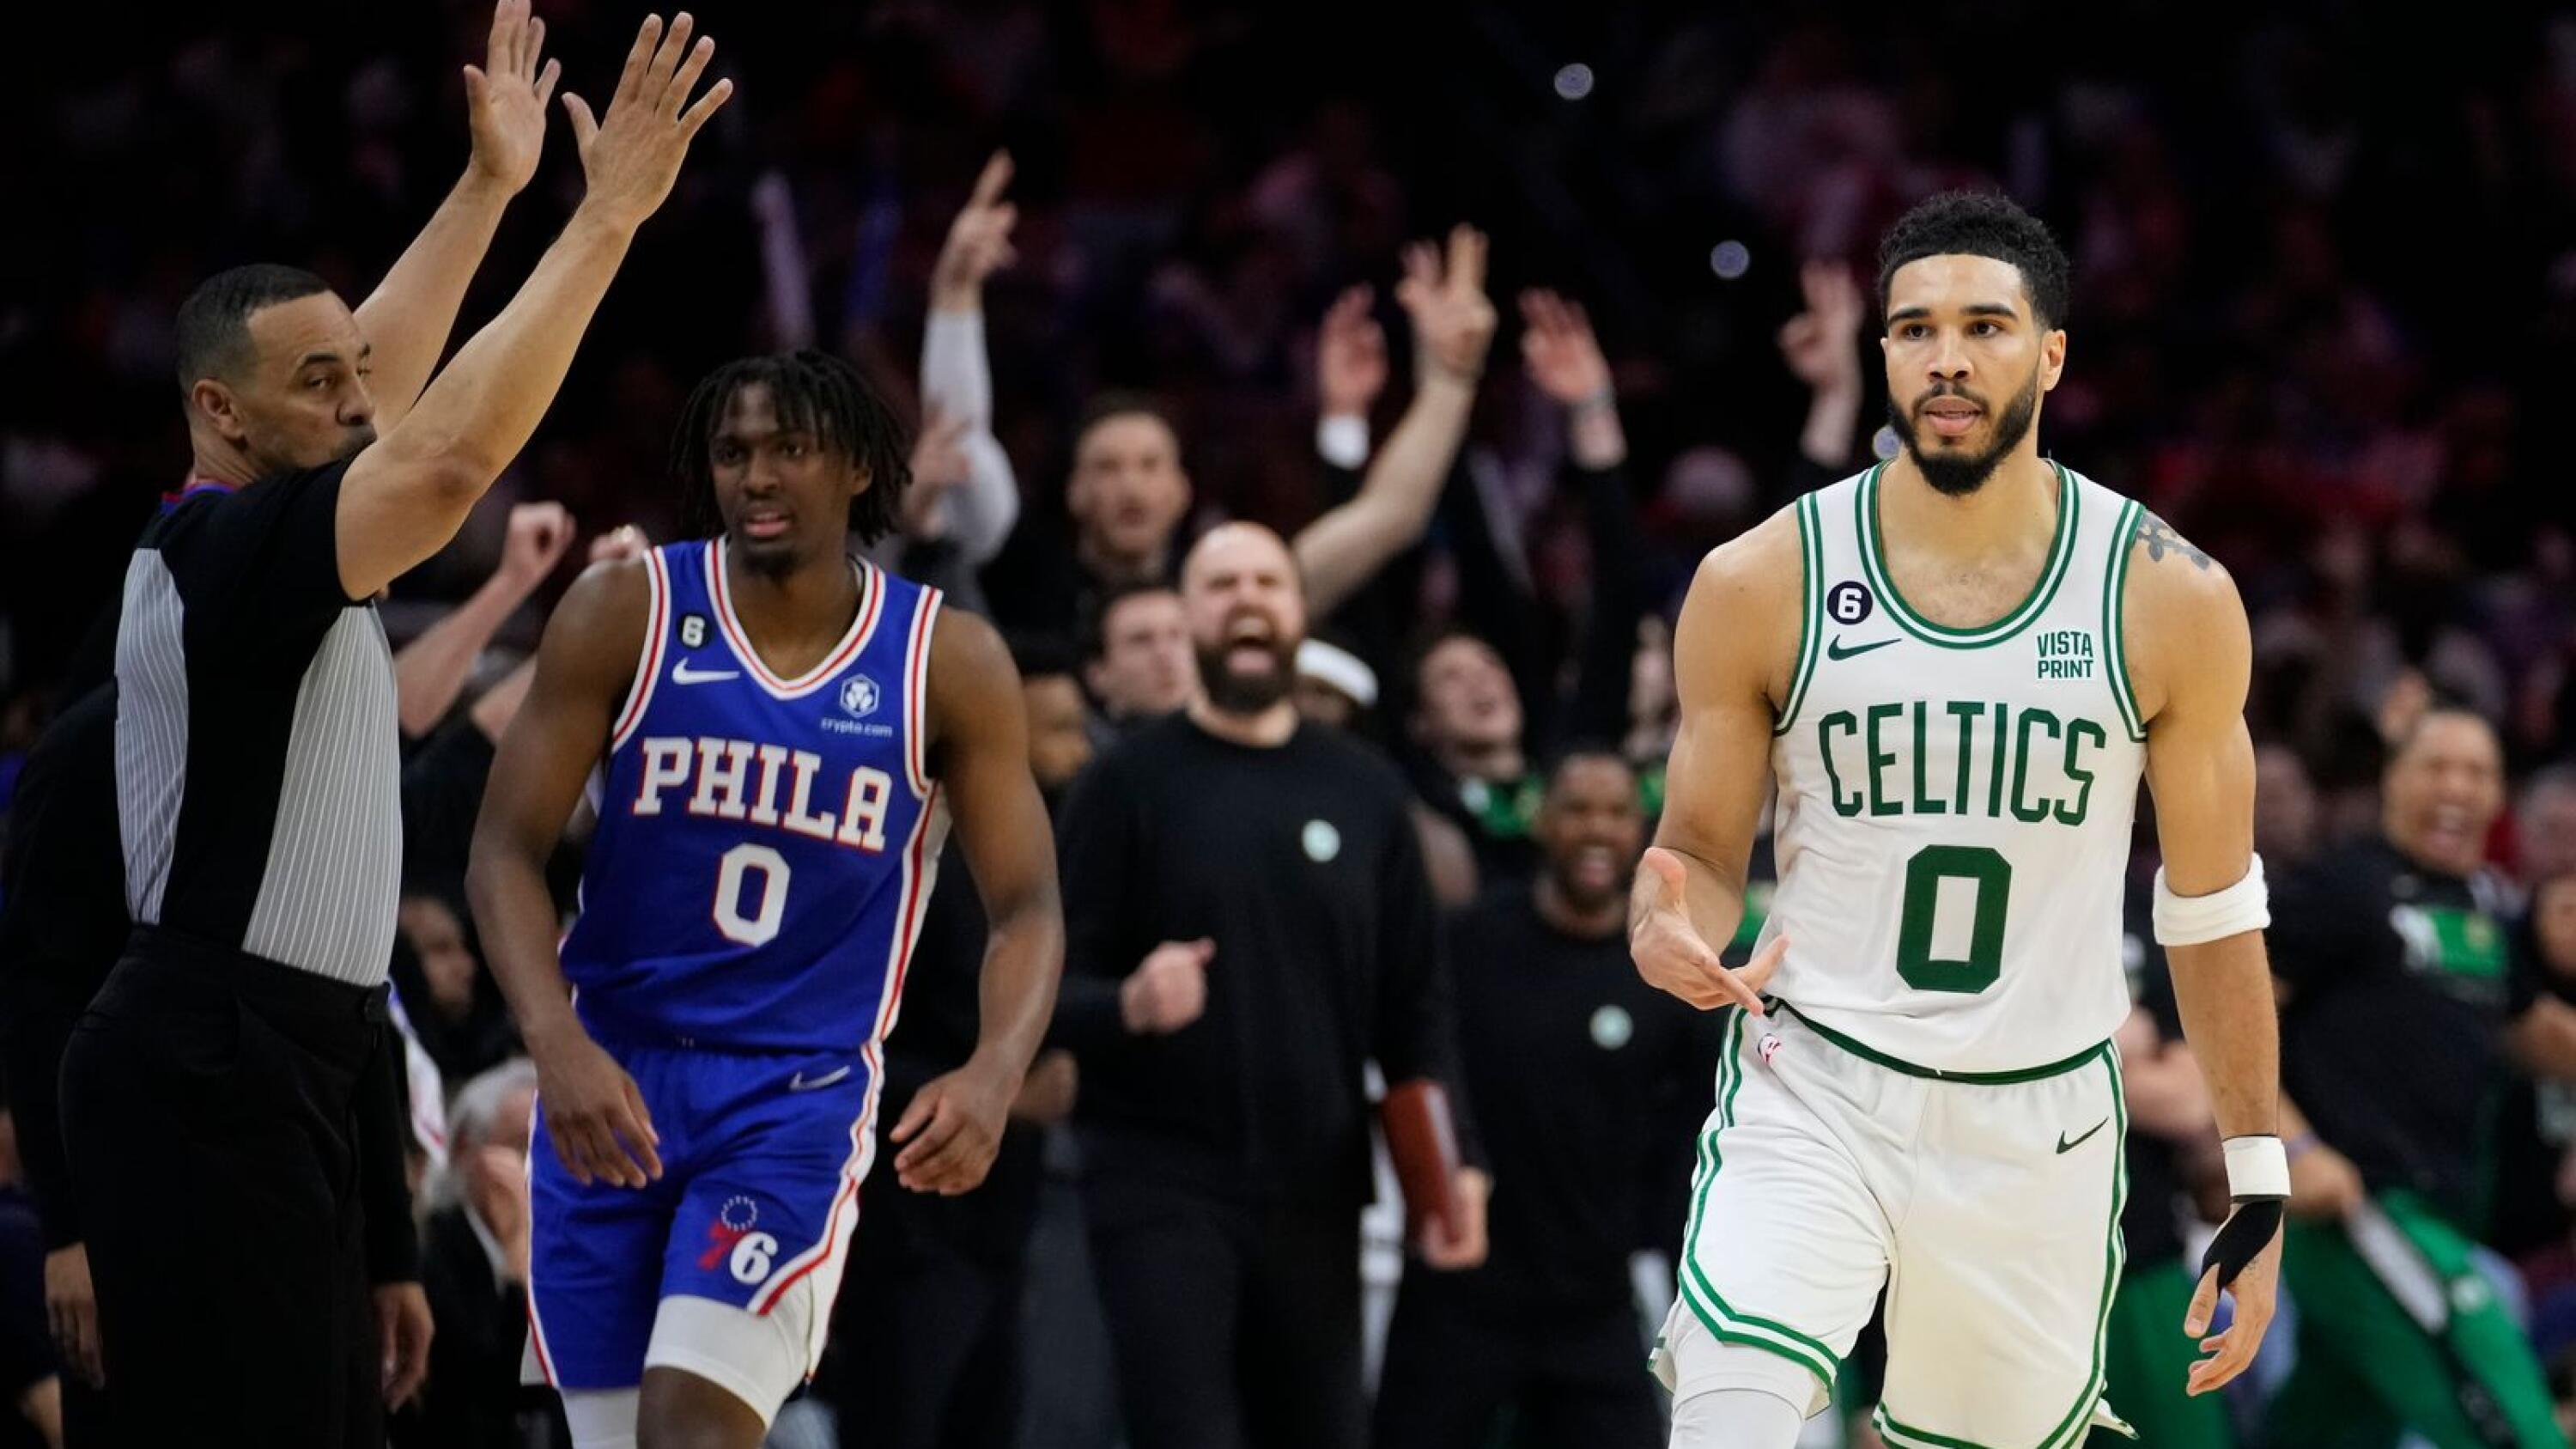 Jayson Tatum now has more 50-point games than anyone else in